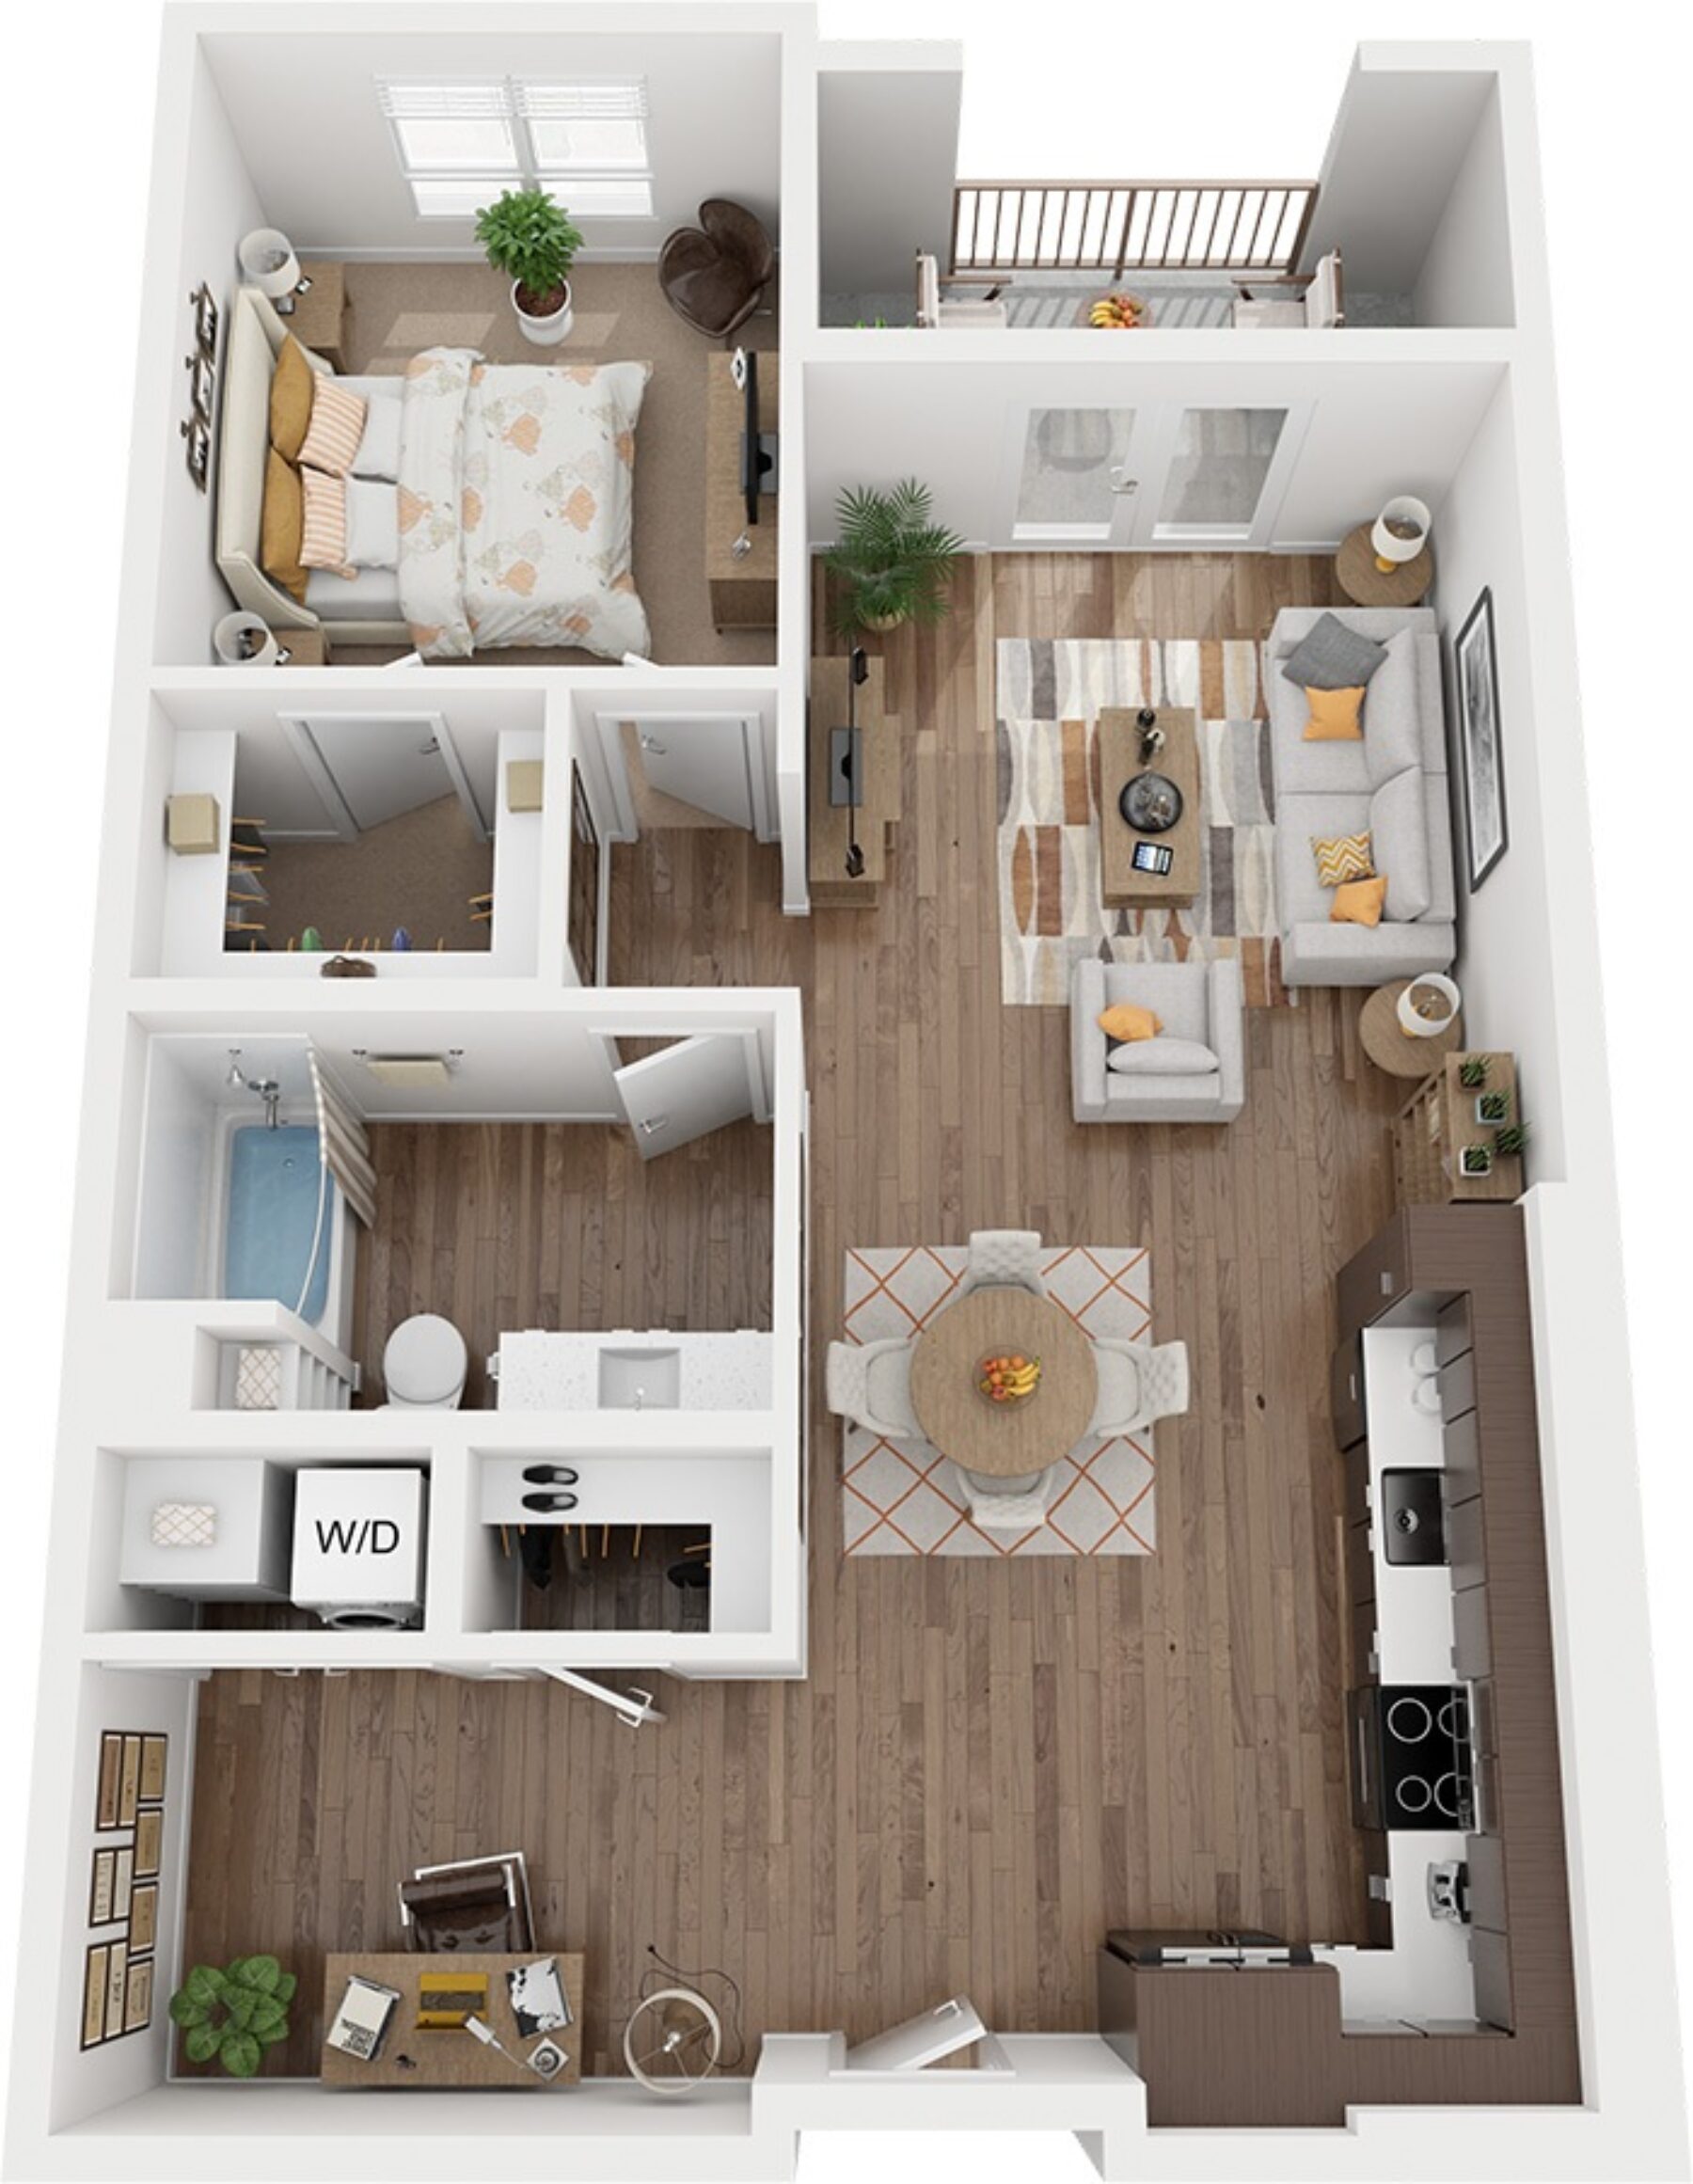 Plan Image: A2 - One Bedroom